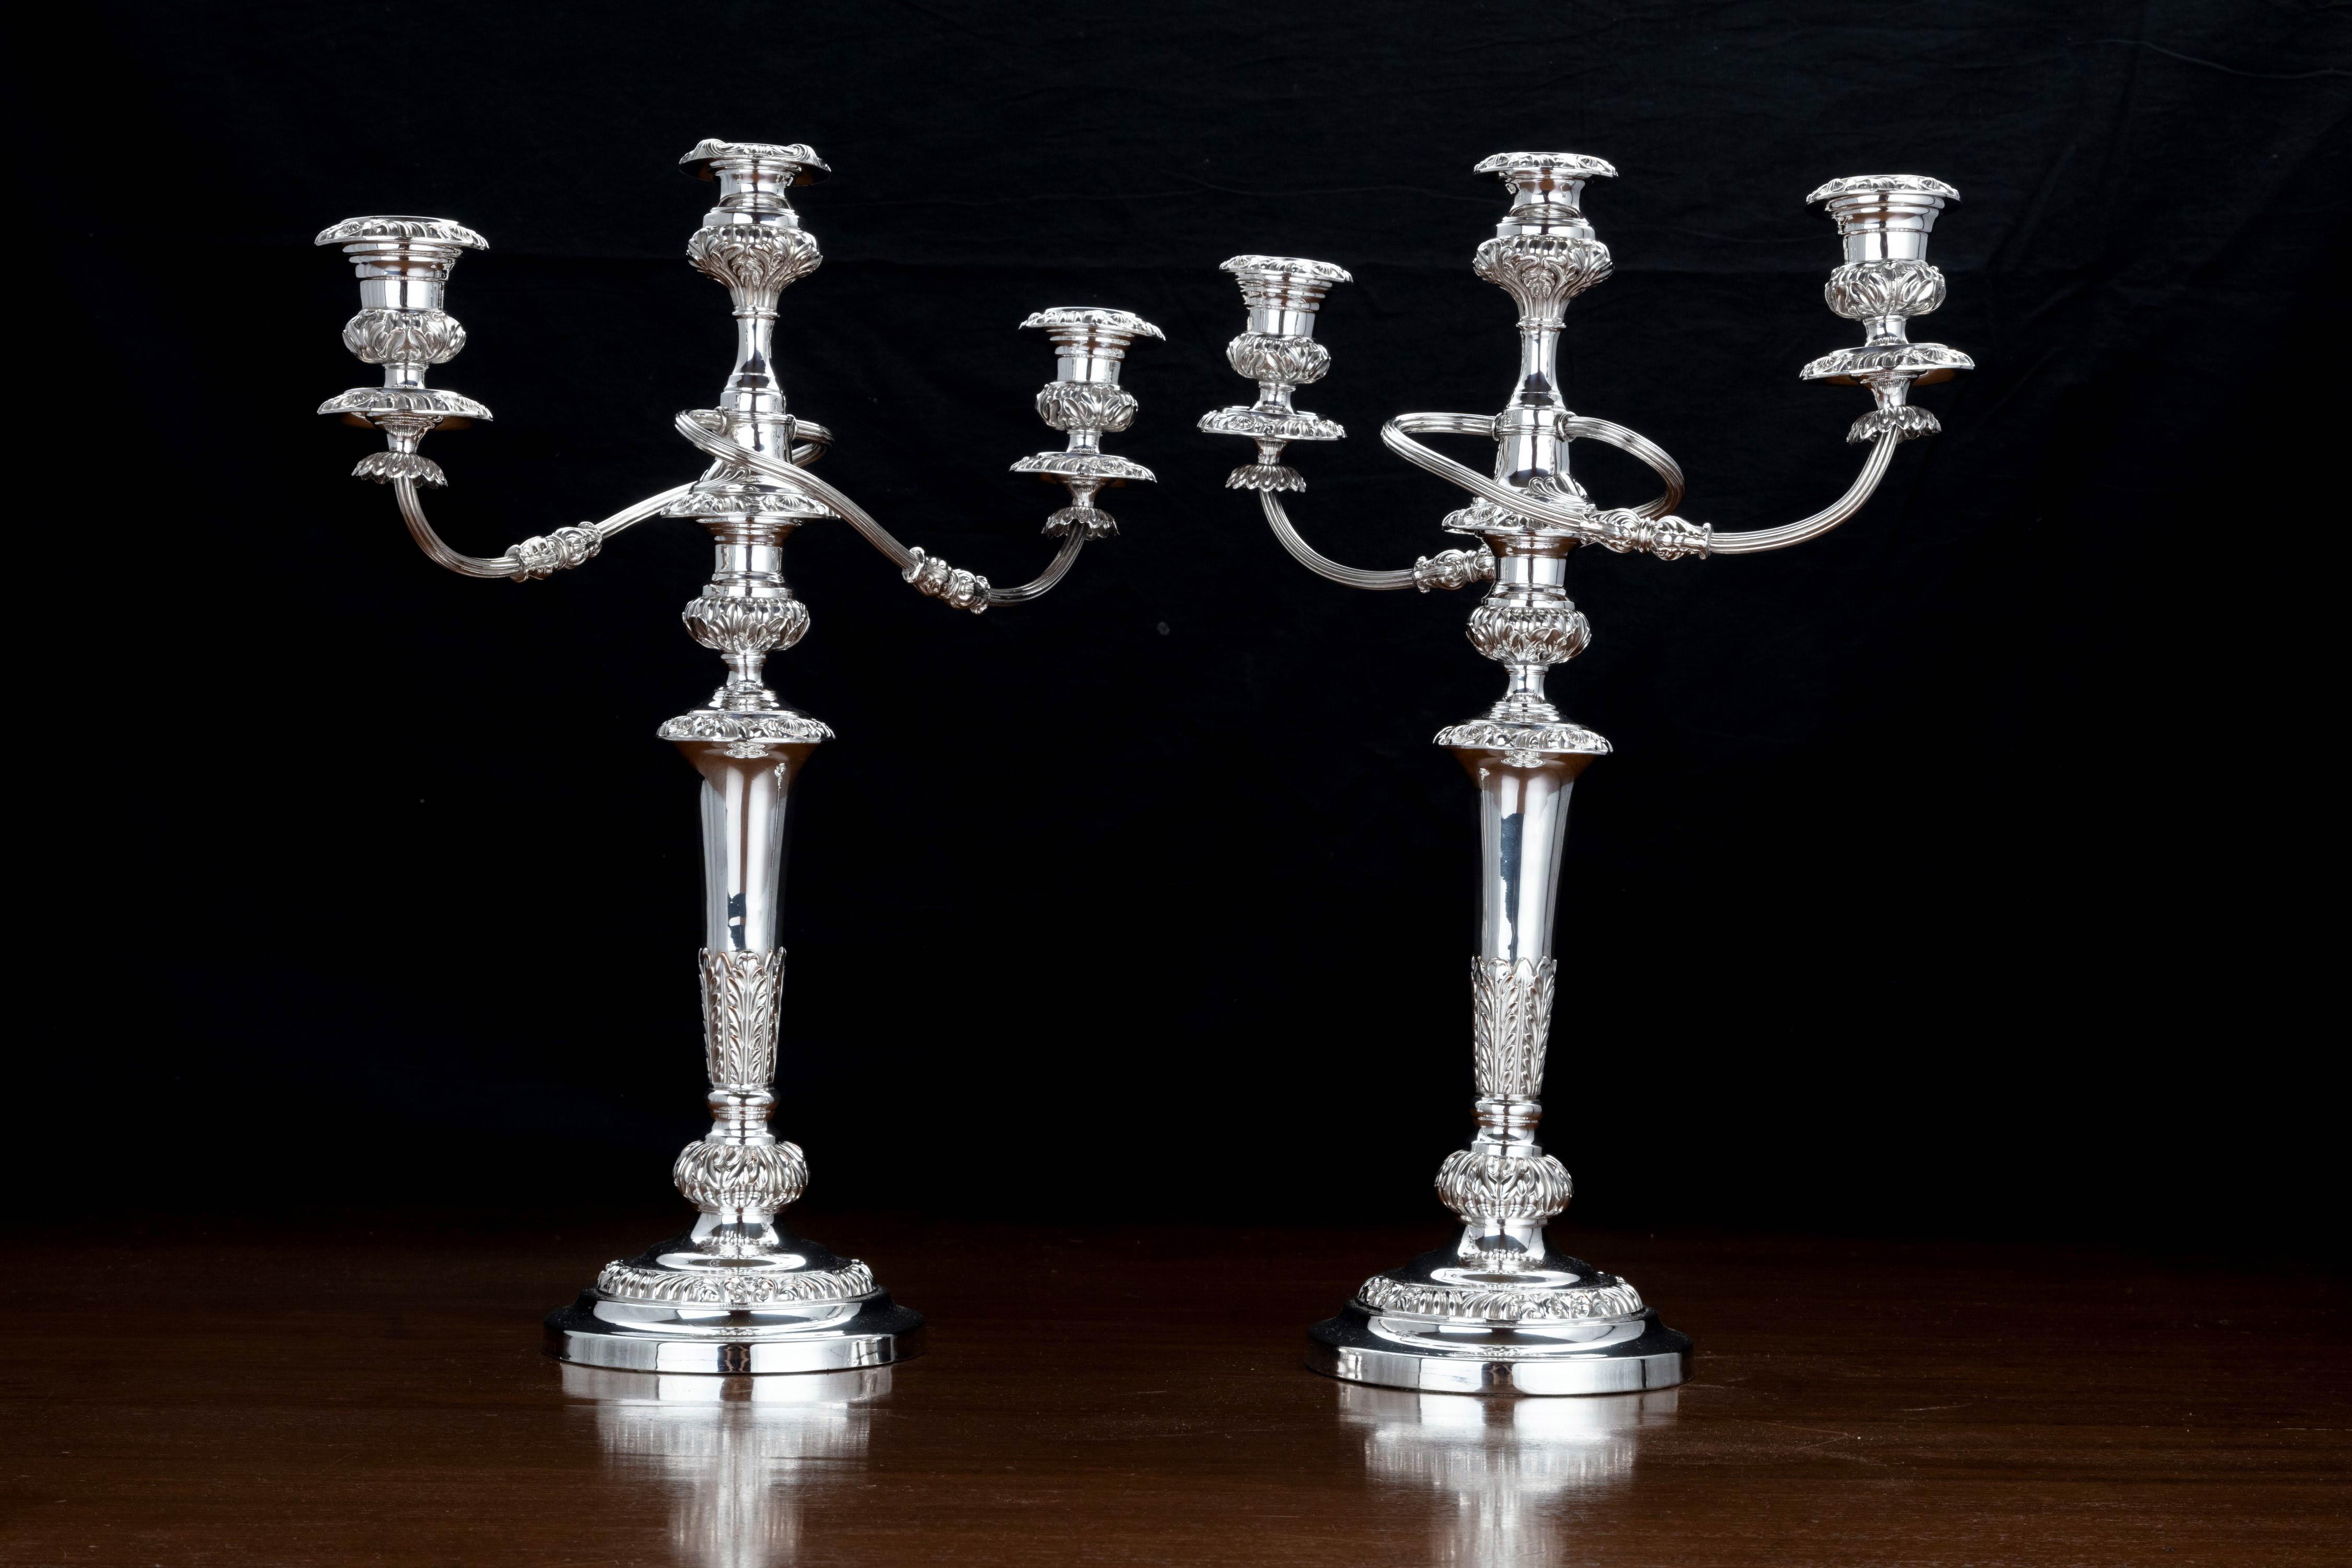 A good pair of Sheffield-plated, three-arm candelabra in excellent original condition. Very well cast details. The arms swept. Can be used as a pair of candlesticks or candelabra.